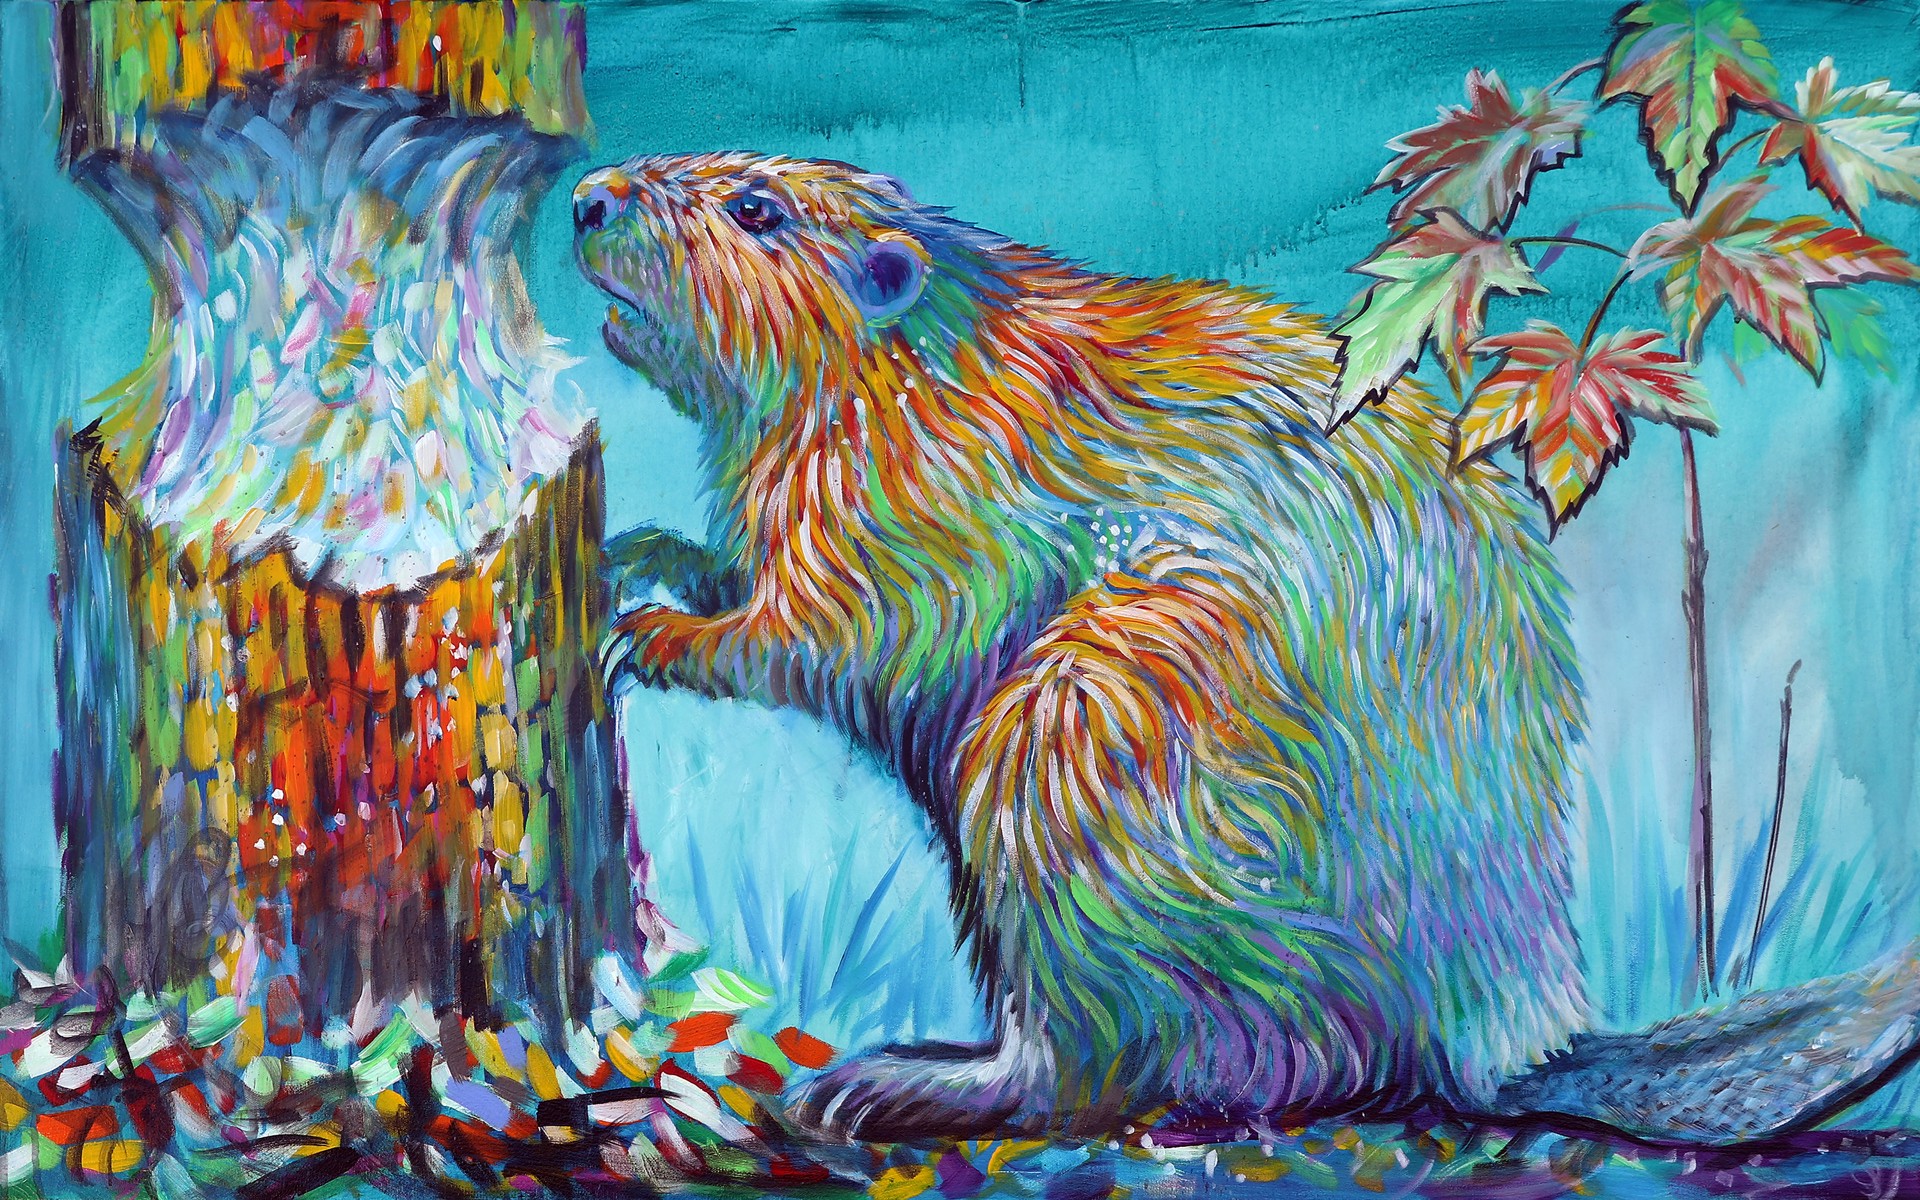 Beaver Logic by Shannon Ford